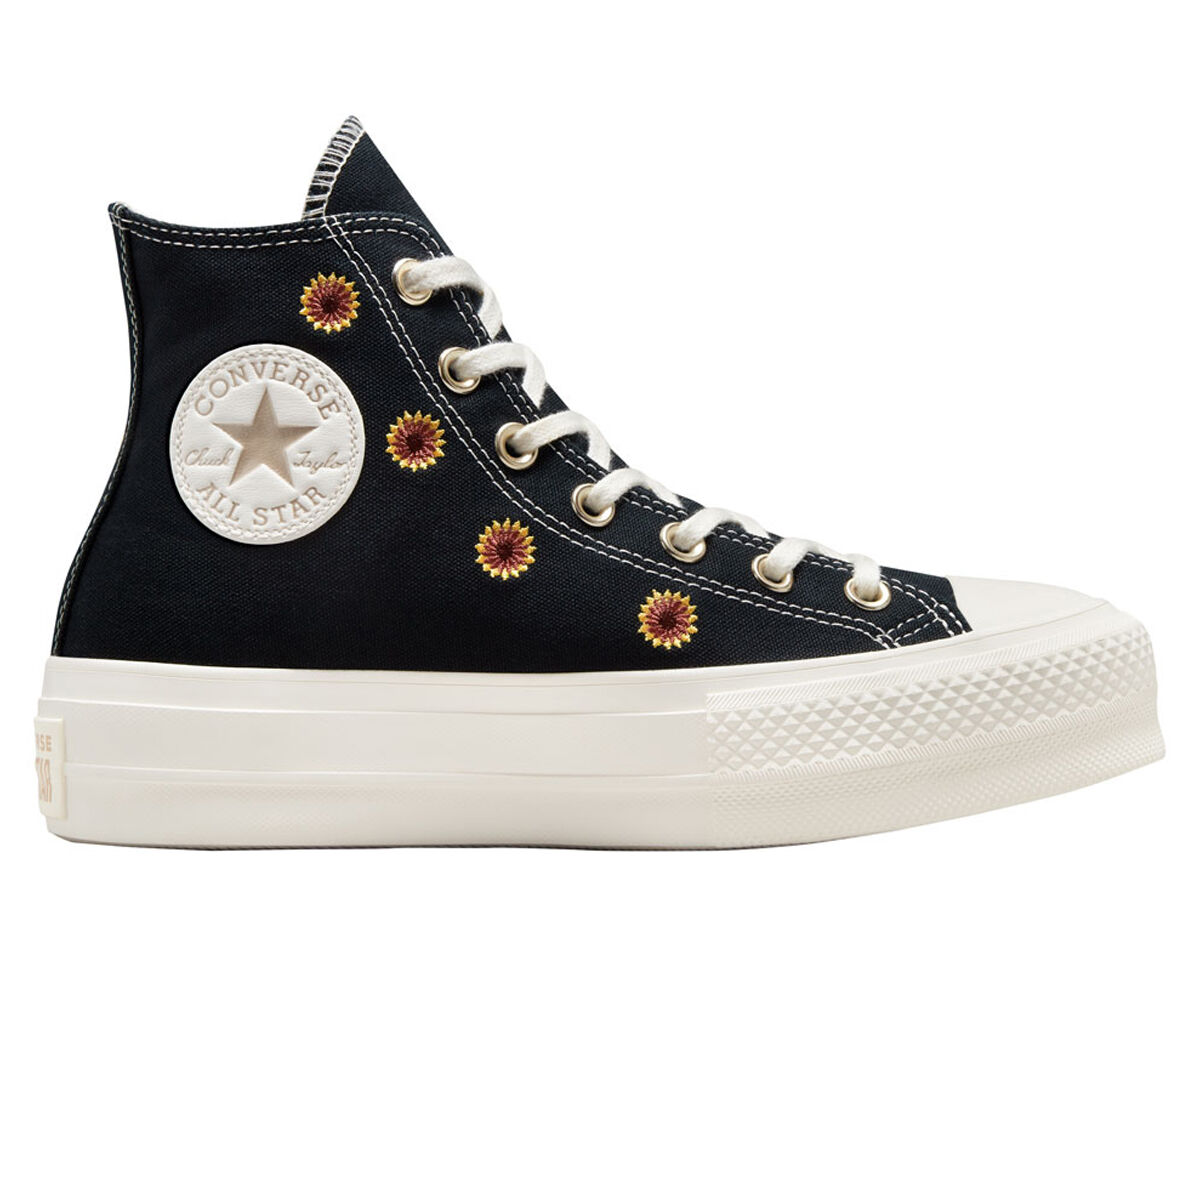 Converse Chuck Taylor All Star Lift High Womens Casual Shoes Black ...